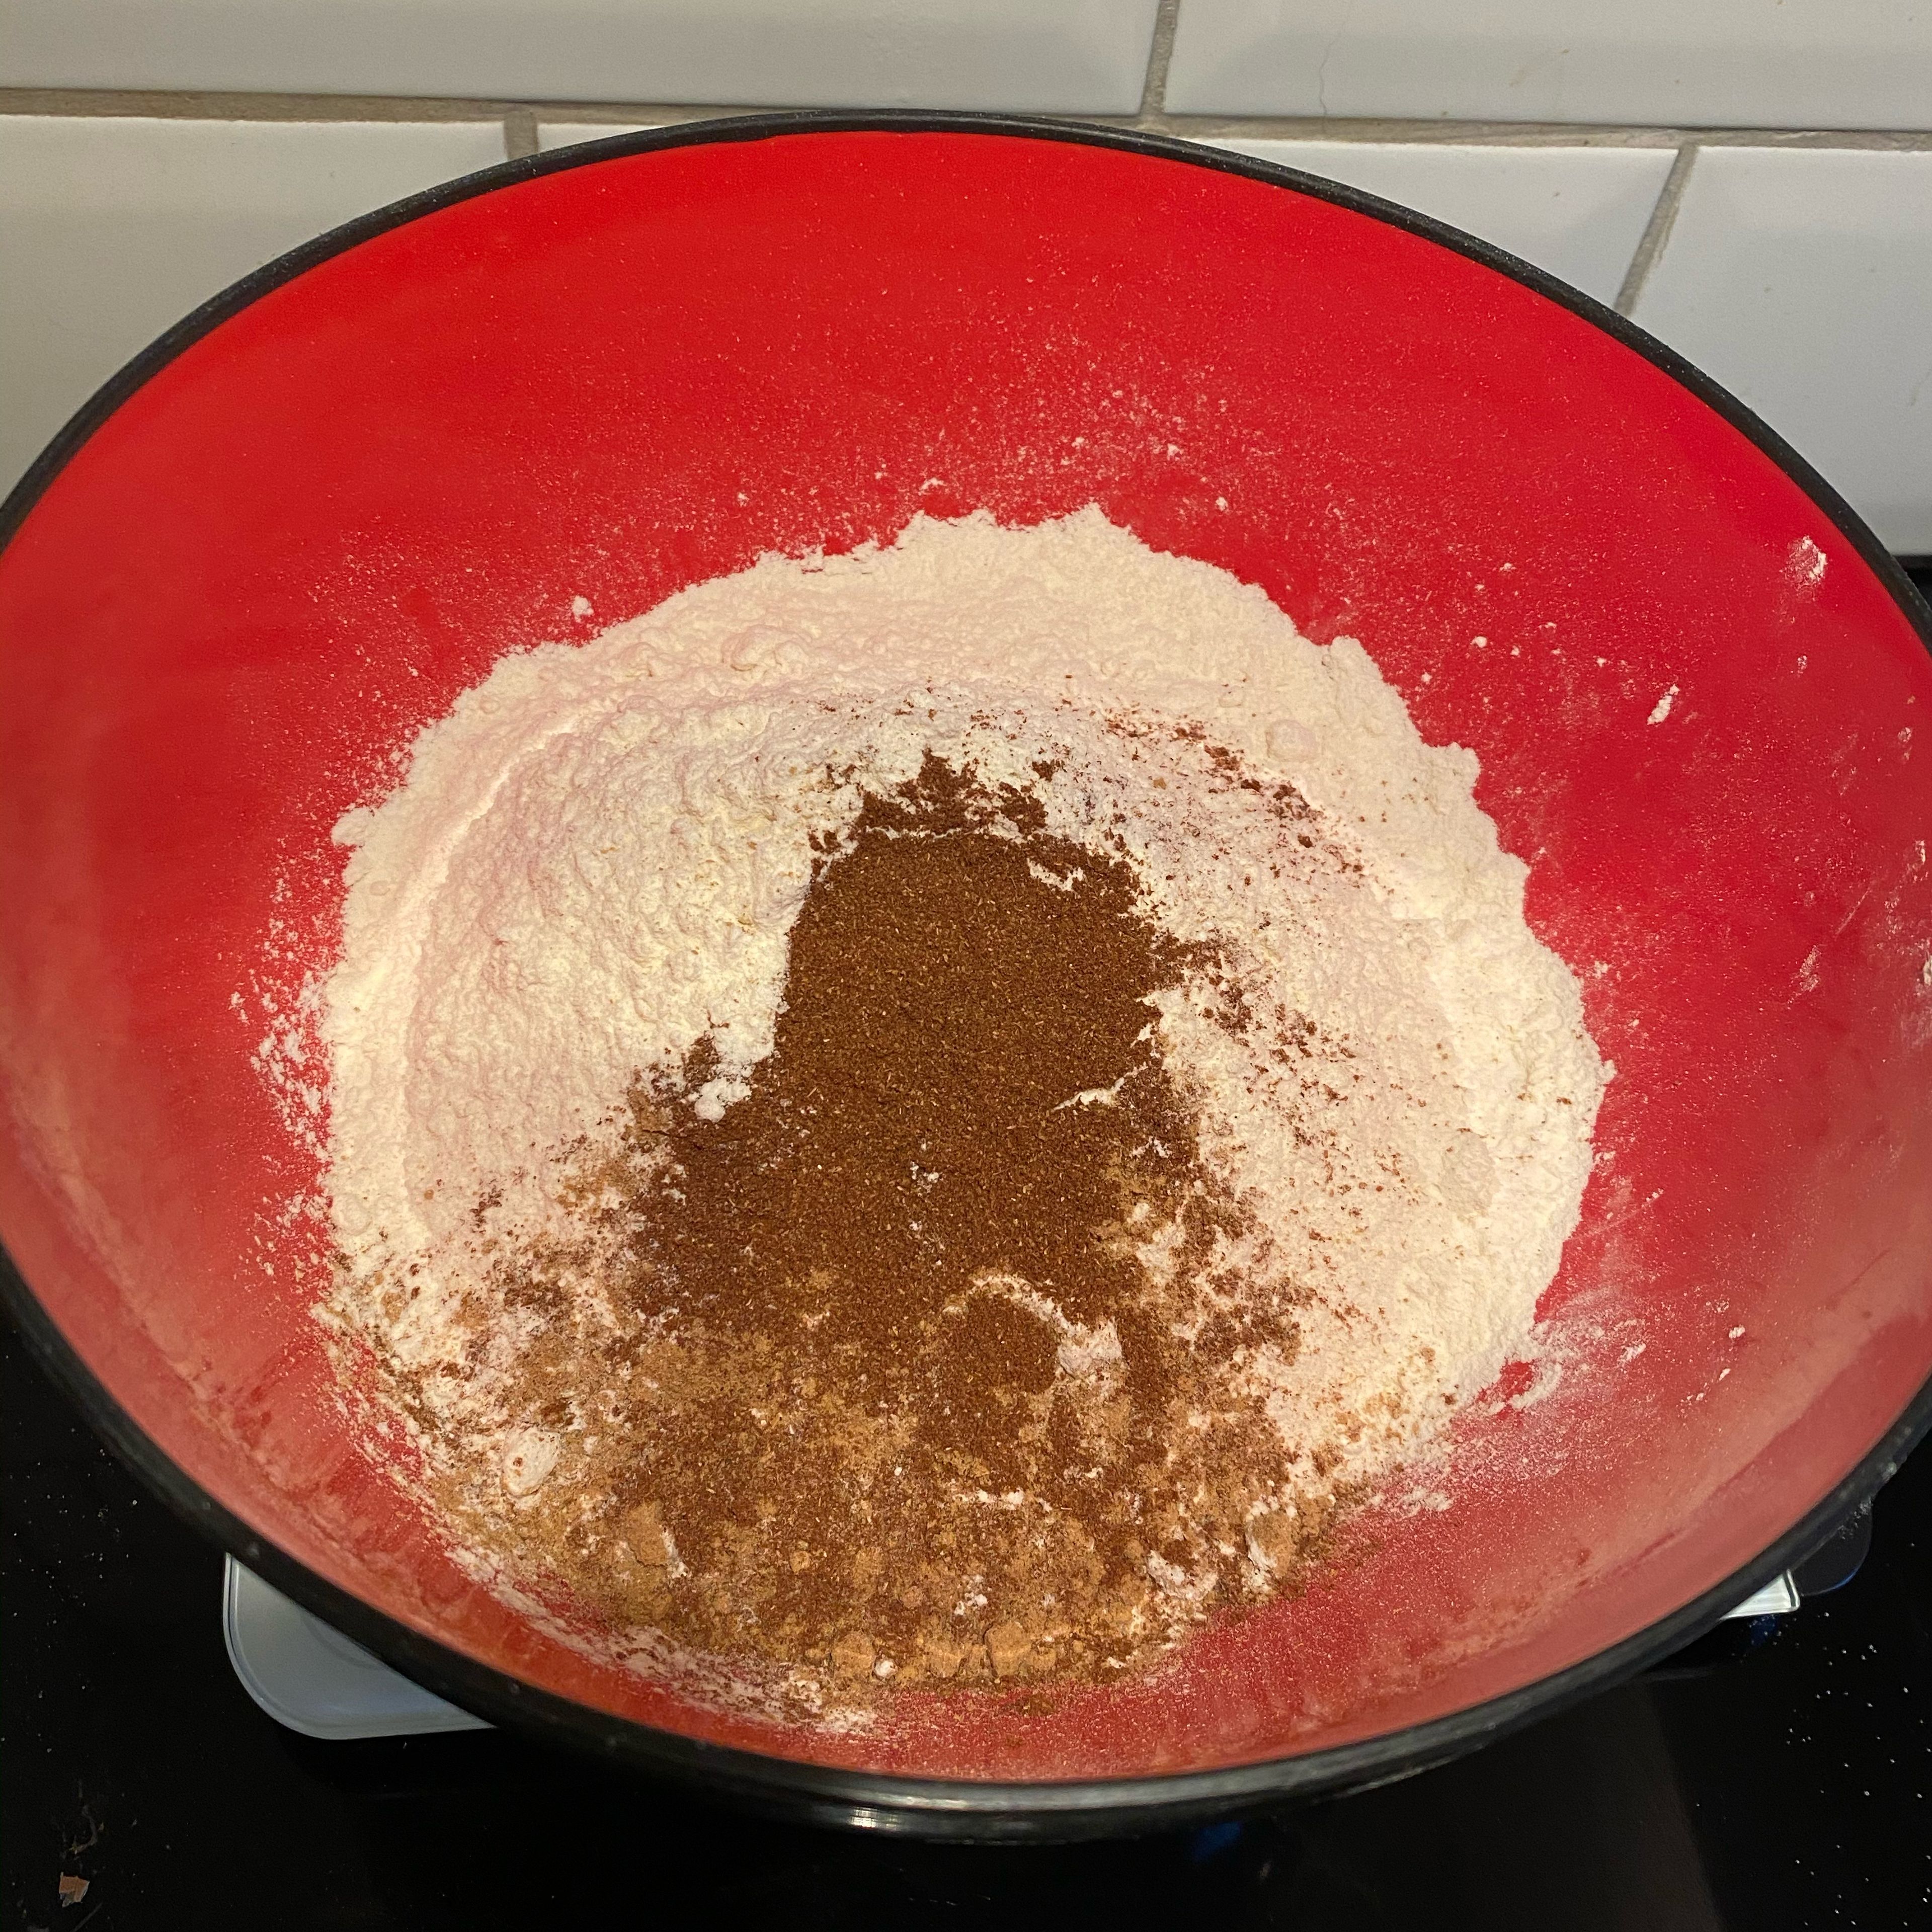 Mix flour, ginger, mixed spice in a bowl